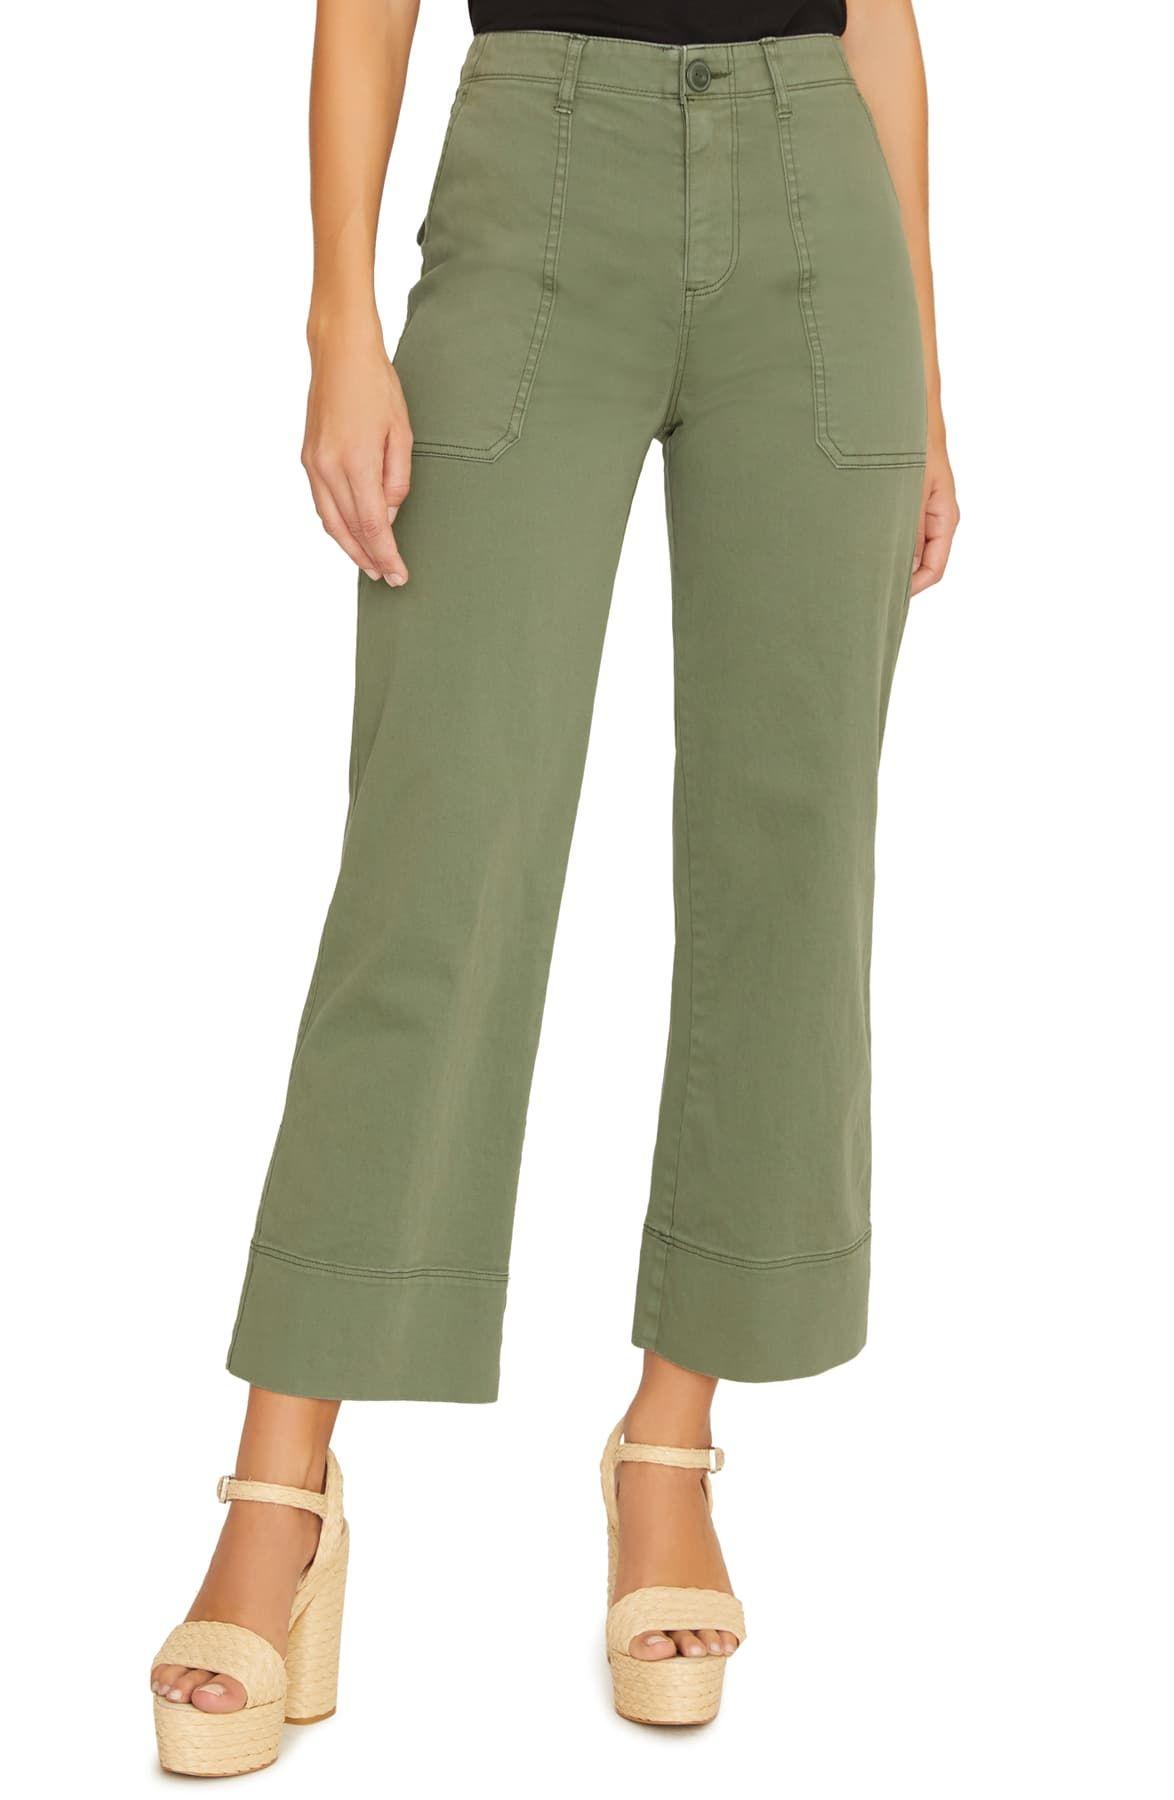 Sanctuary Unearthed Patch Pocket Stretch Cotton Crop Pants in Green - Lyst